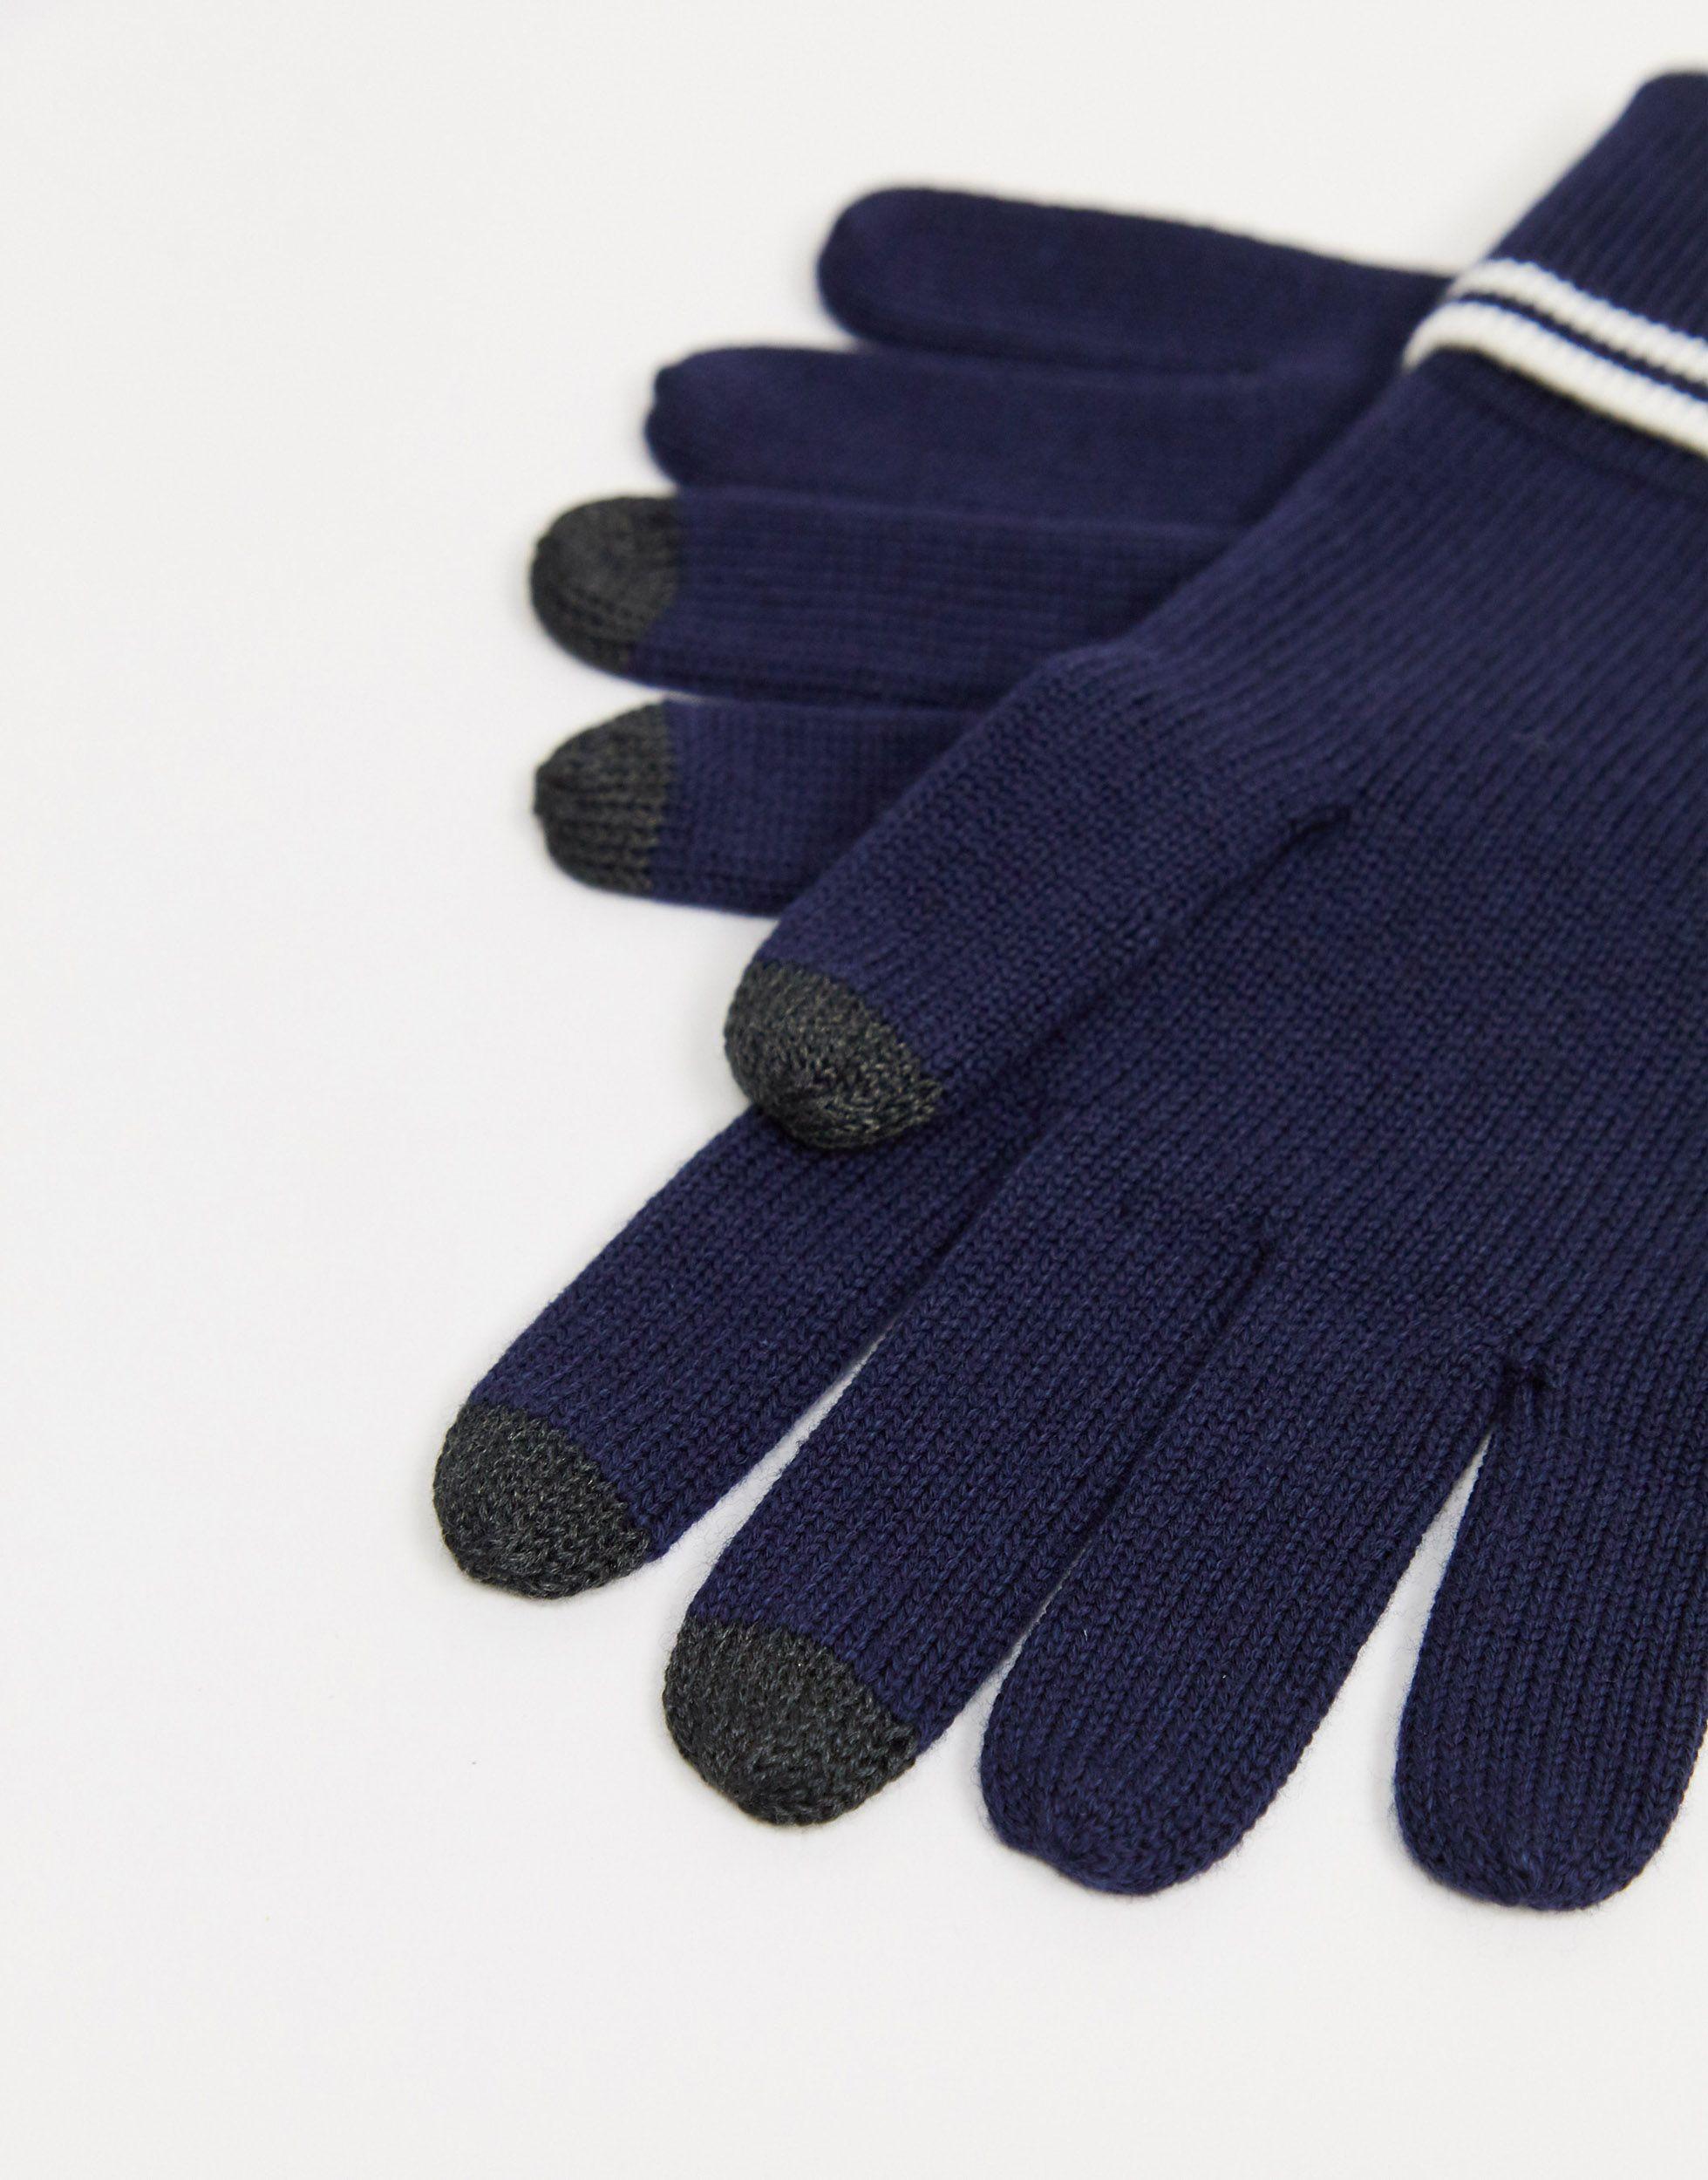 Fred Perry Merino Wool Touch Screen Gloves in Navy (Blue) for Men - Lyst